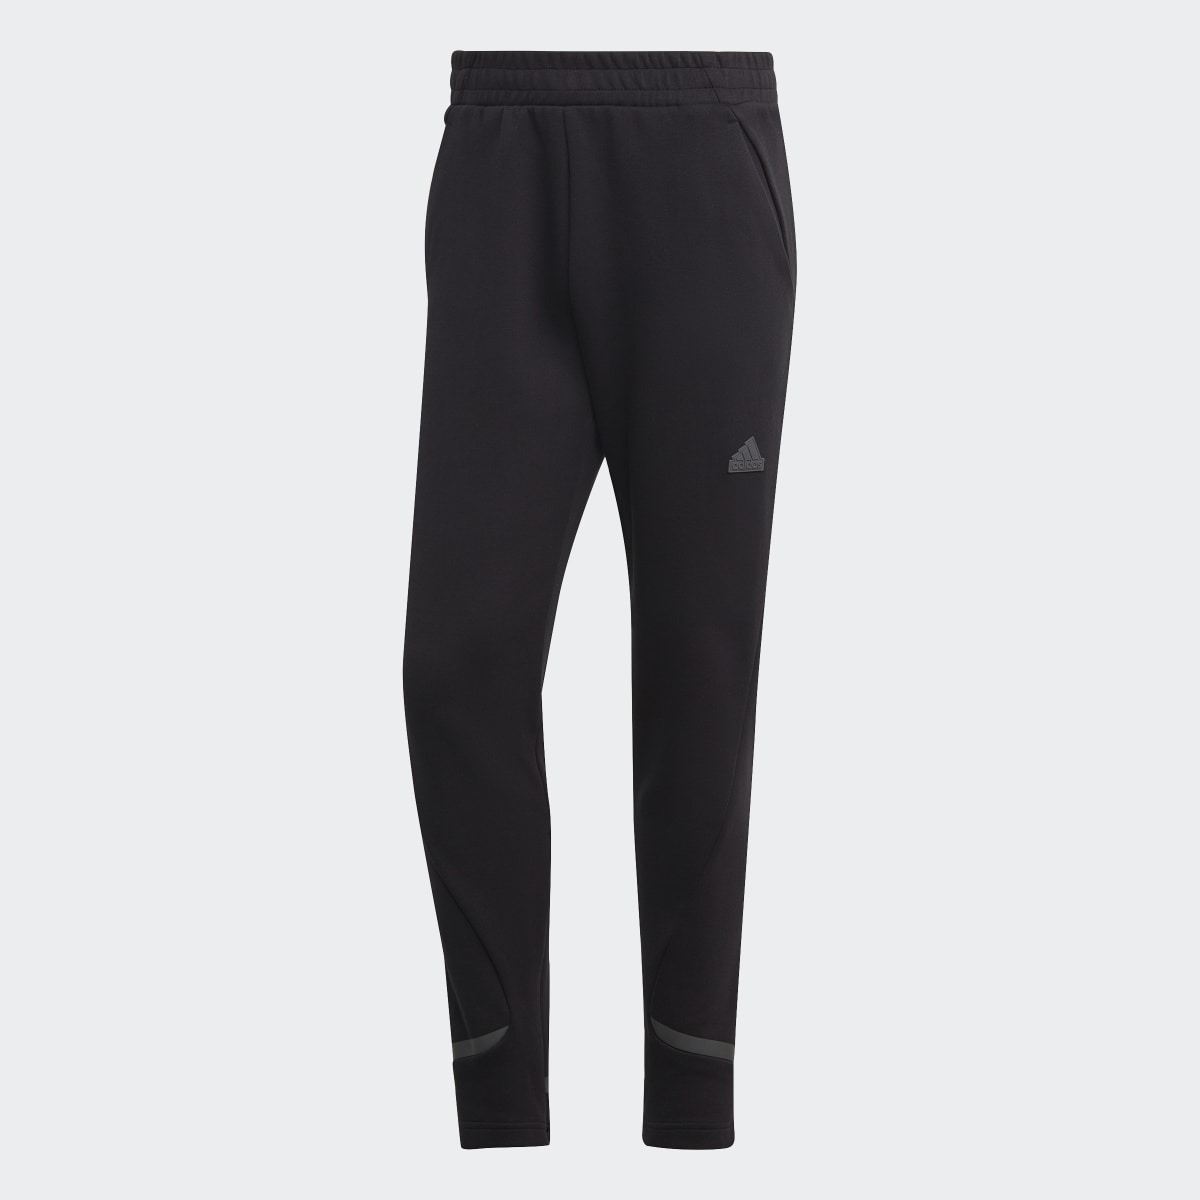 Adidas Pants Designed for Gameday. 5